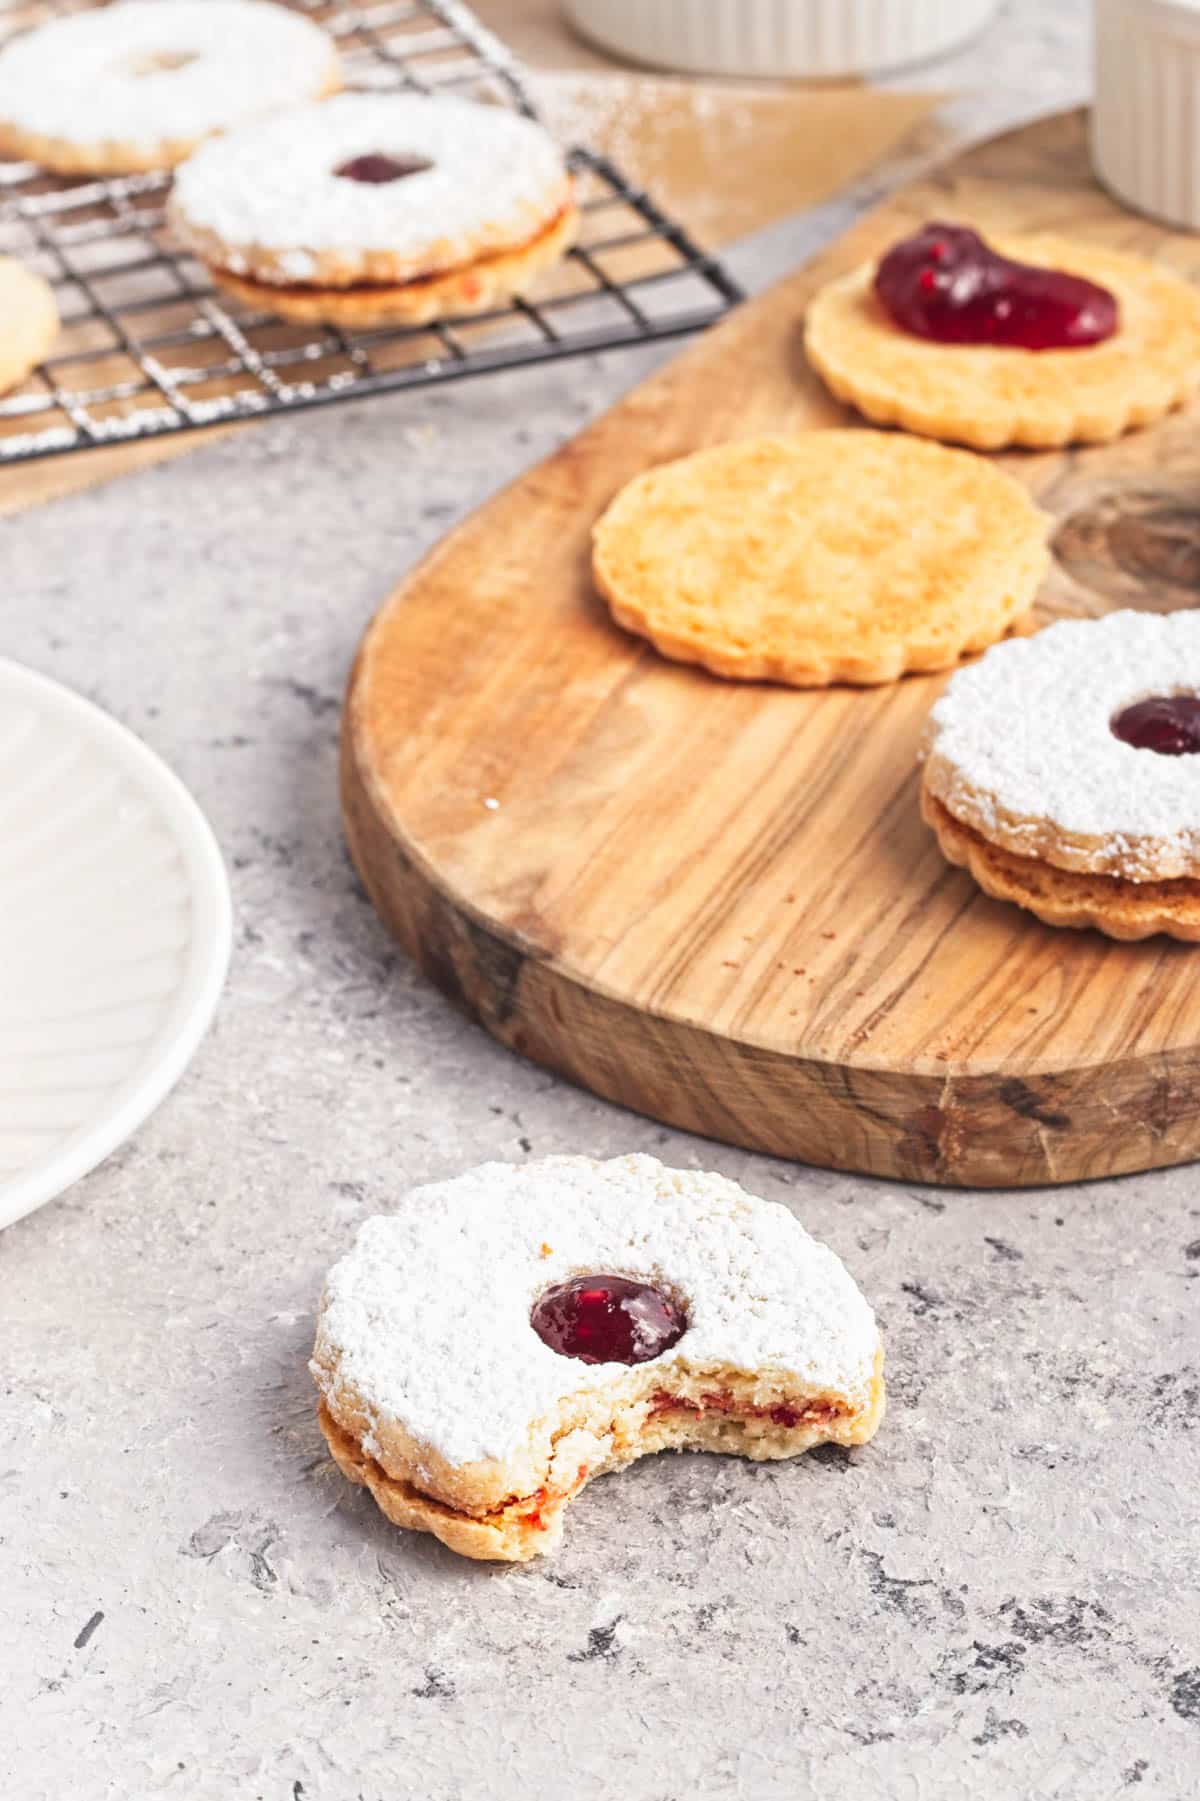 Cookies with jam and powdered sugar on a white plate on napkin with more cookies in background.